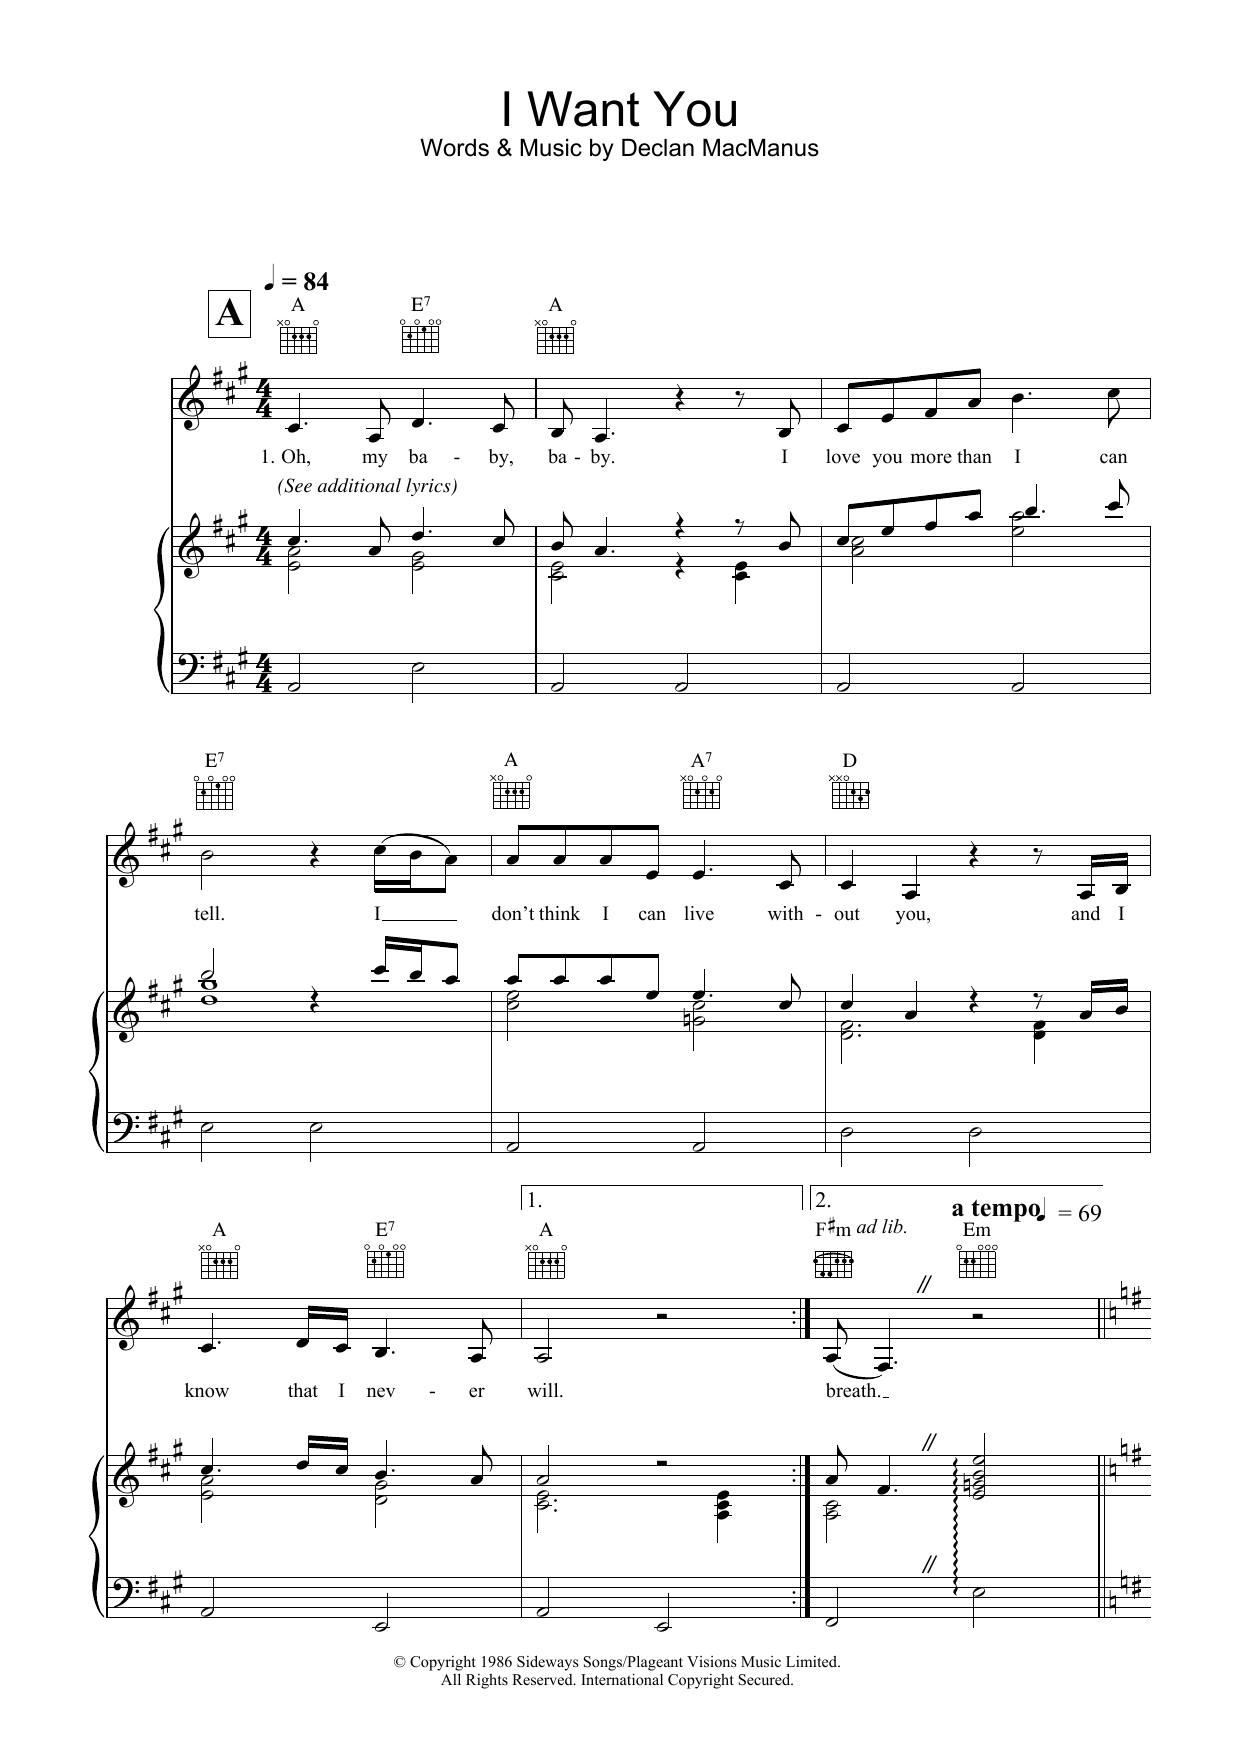 Elvis Costello I Want You sheet music notes and chords. Download Printable PDF.